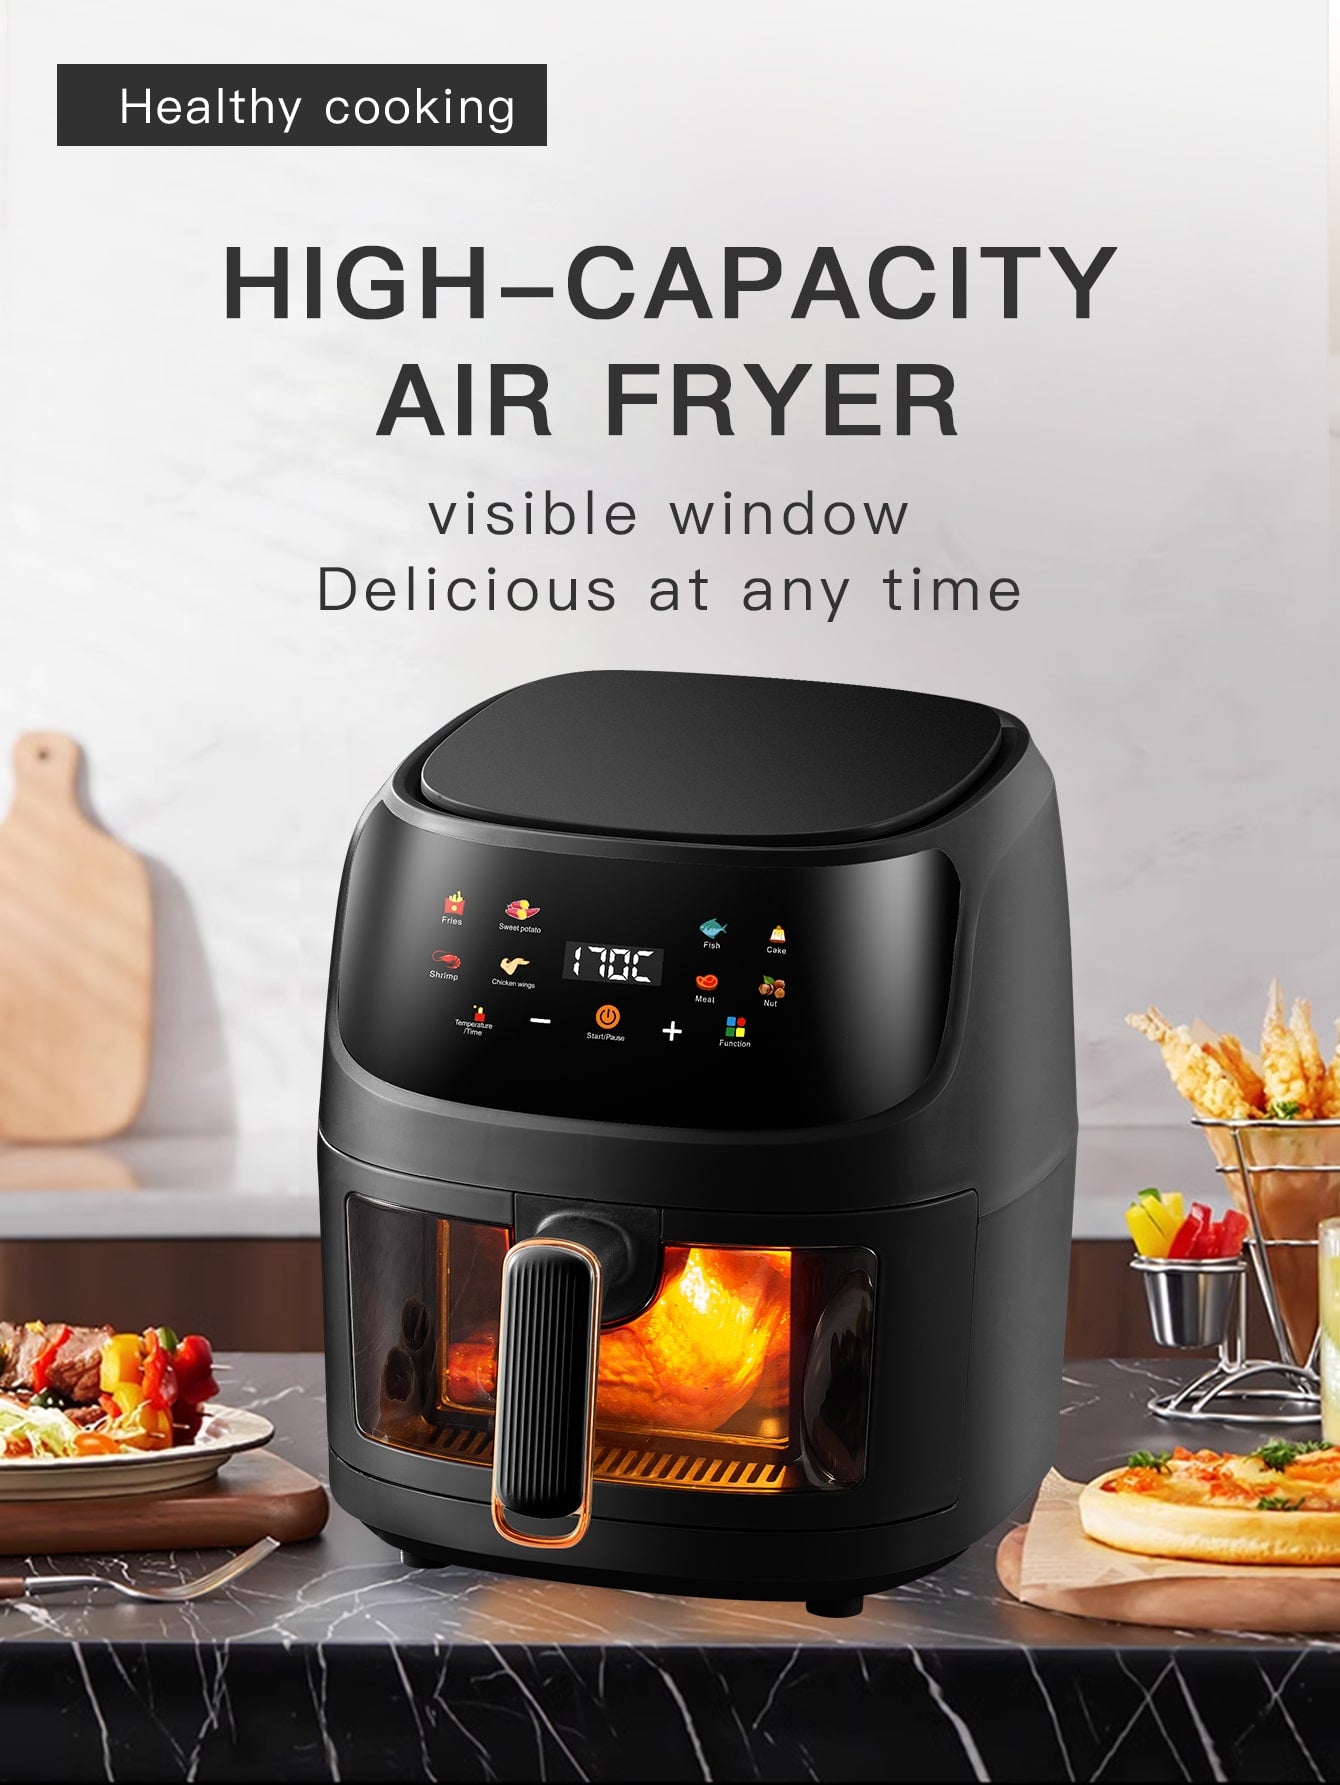 1pc Desktop Electric 6l Large Capacity Multi-functional Visible Air Fryer Qf-606 With Color Touch Screen, Suitable For Party Chicken Wings, Fries, Steak, For Home Cooking-Black-1